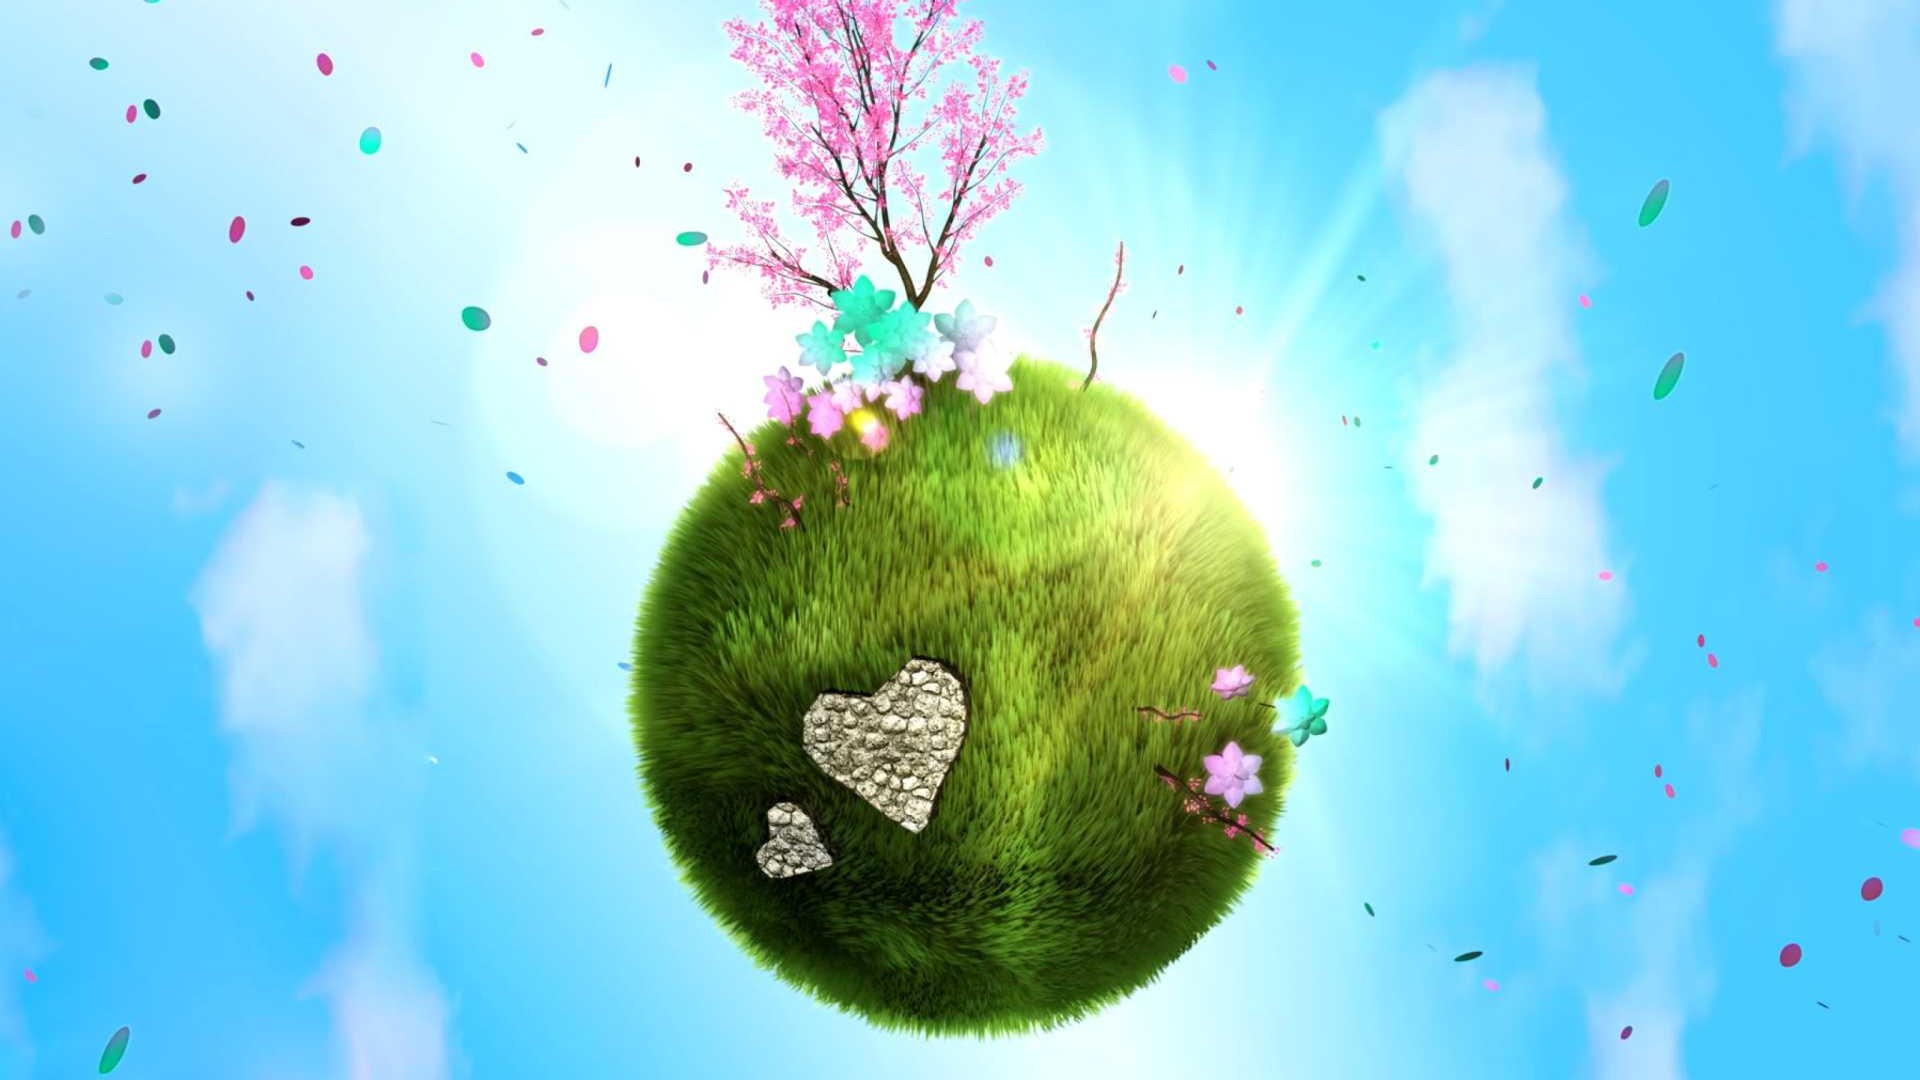 Earth Day Wallpapers - Top 20 Best Earth Day Wallpapers Download